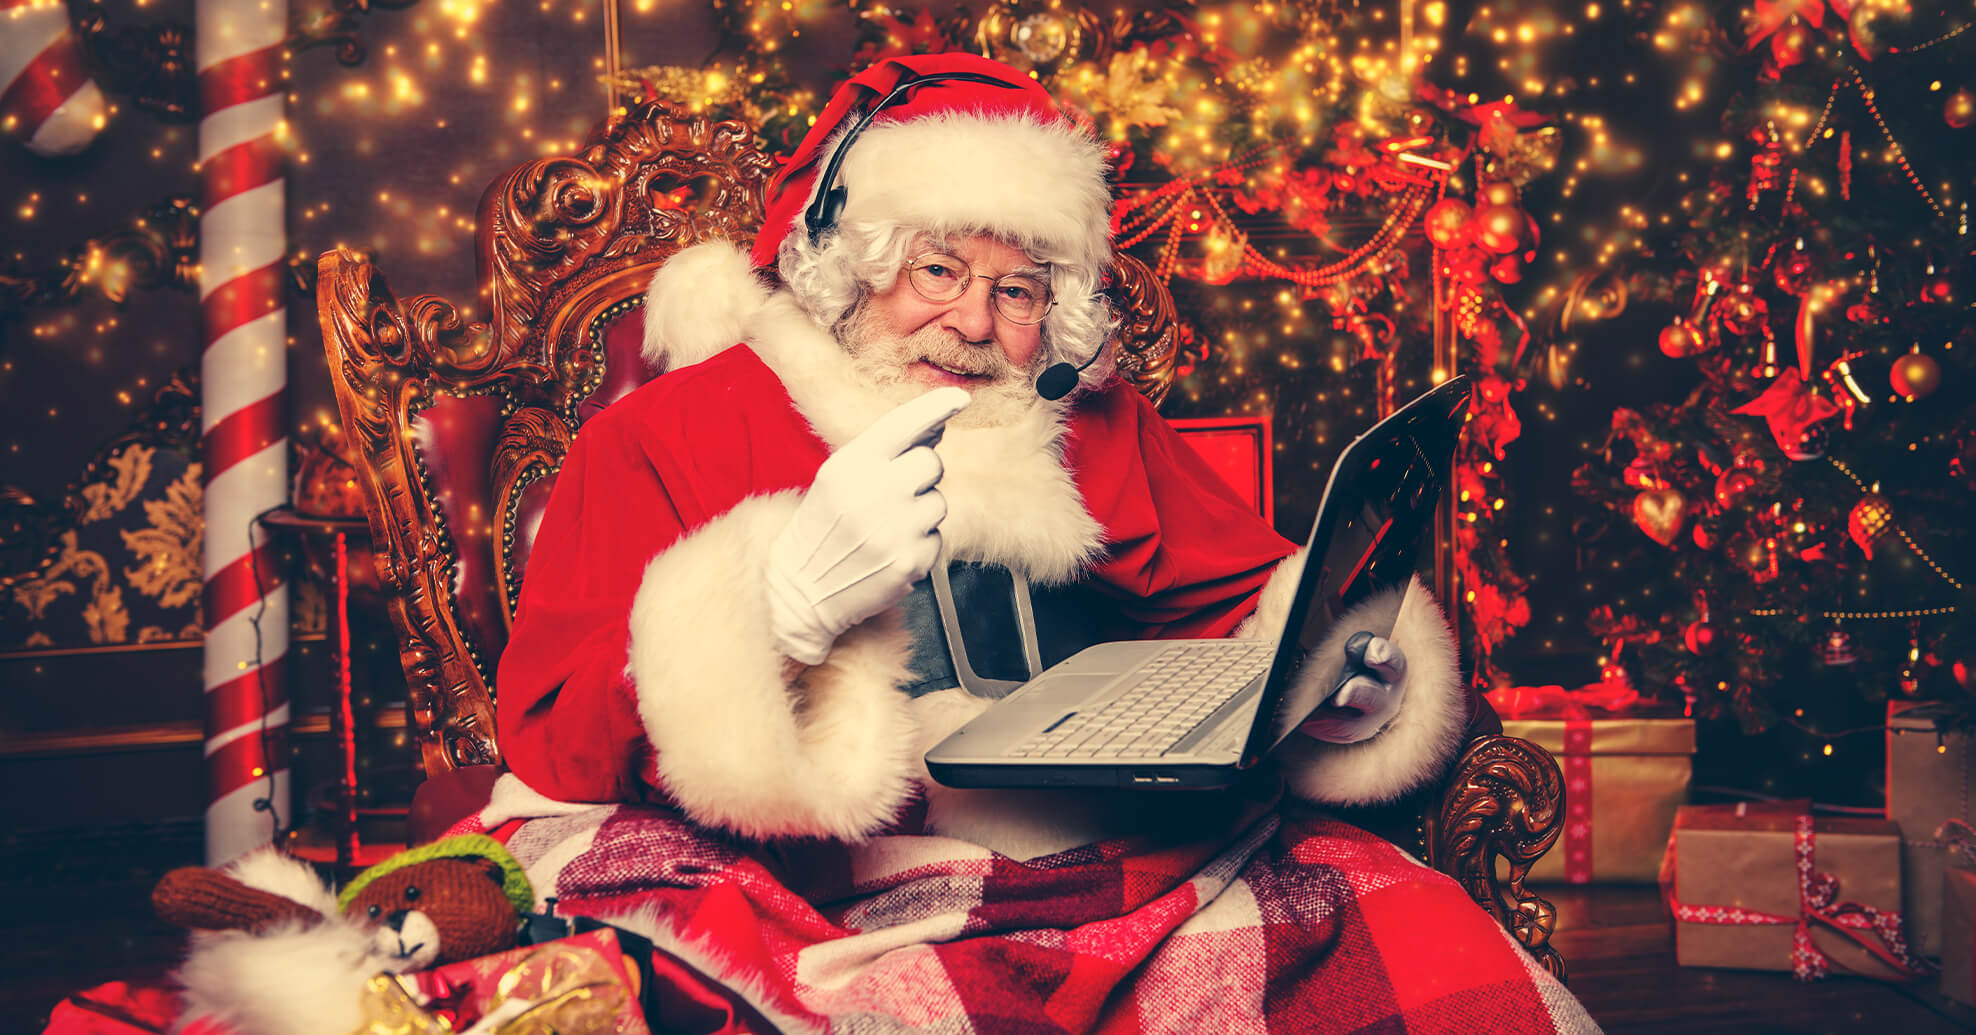 Customer Service Lessons to Learn from Santa